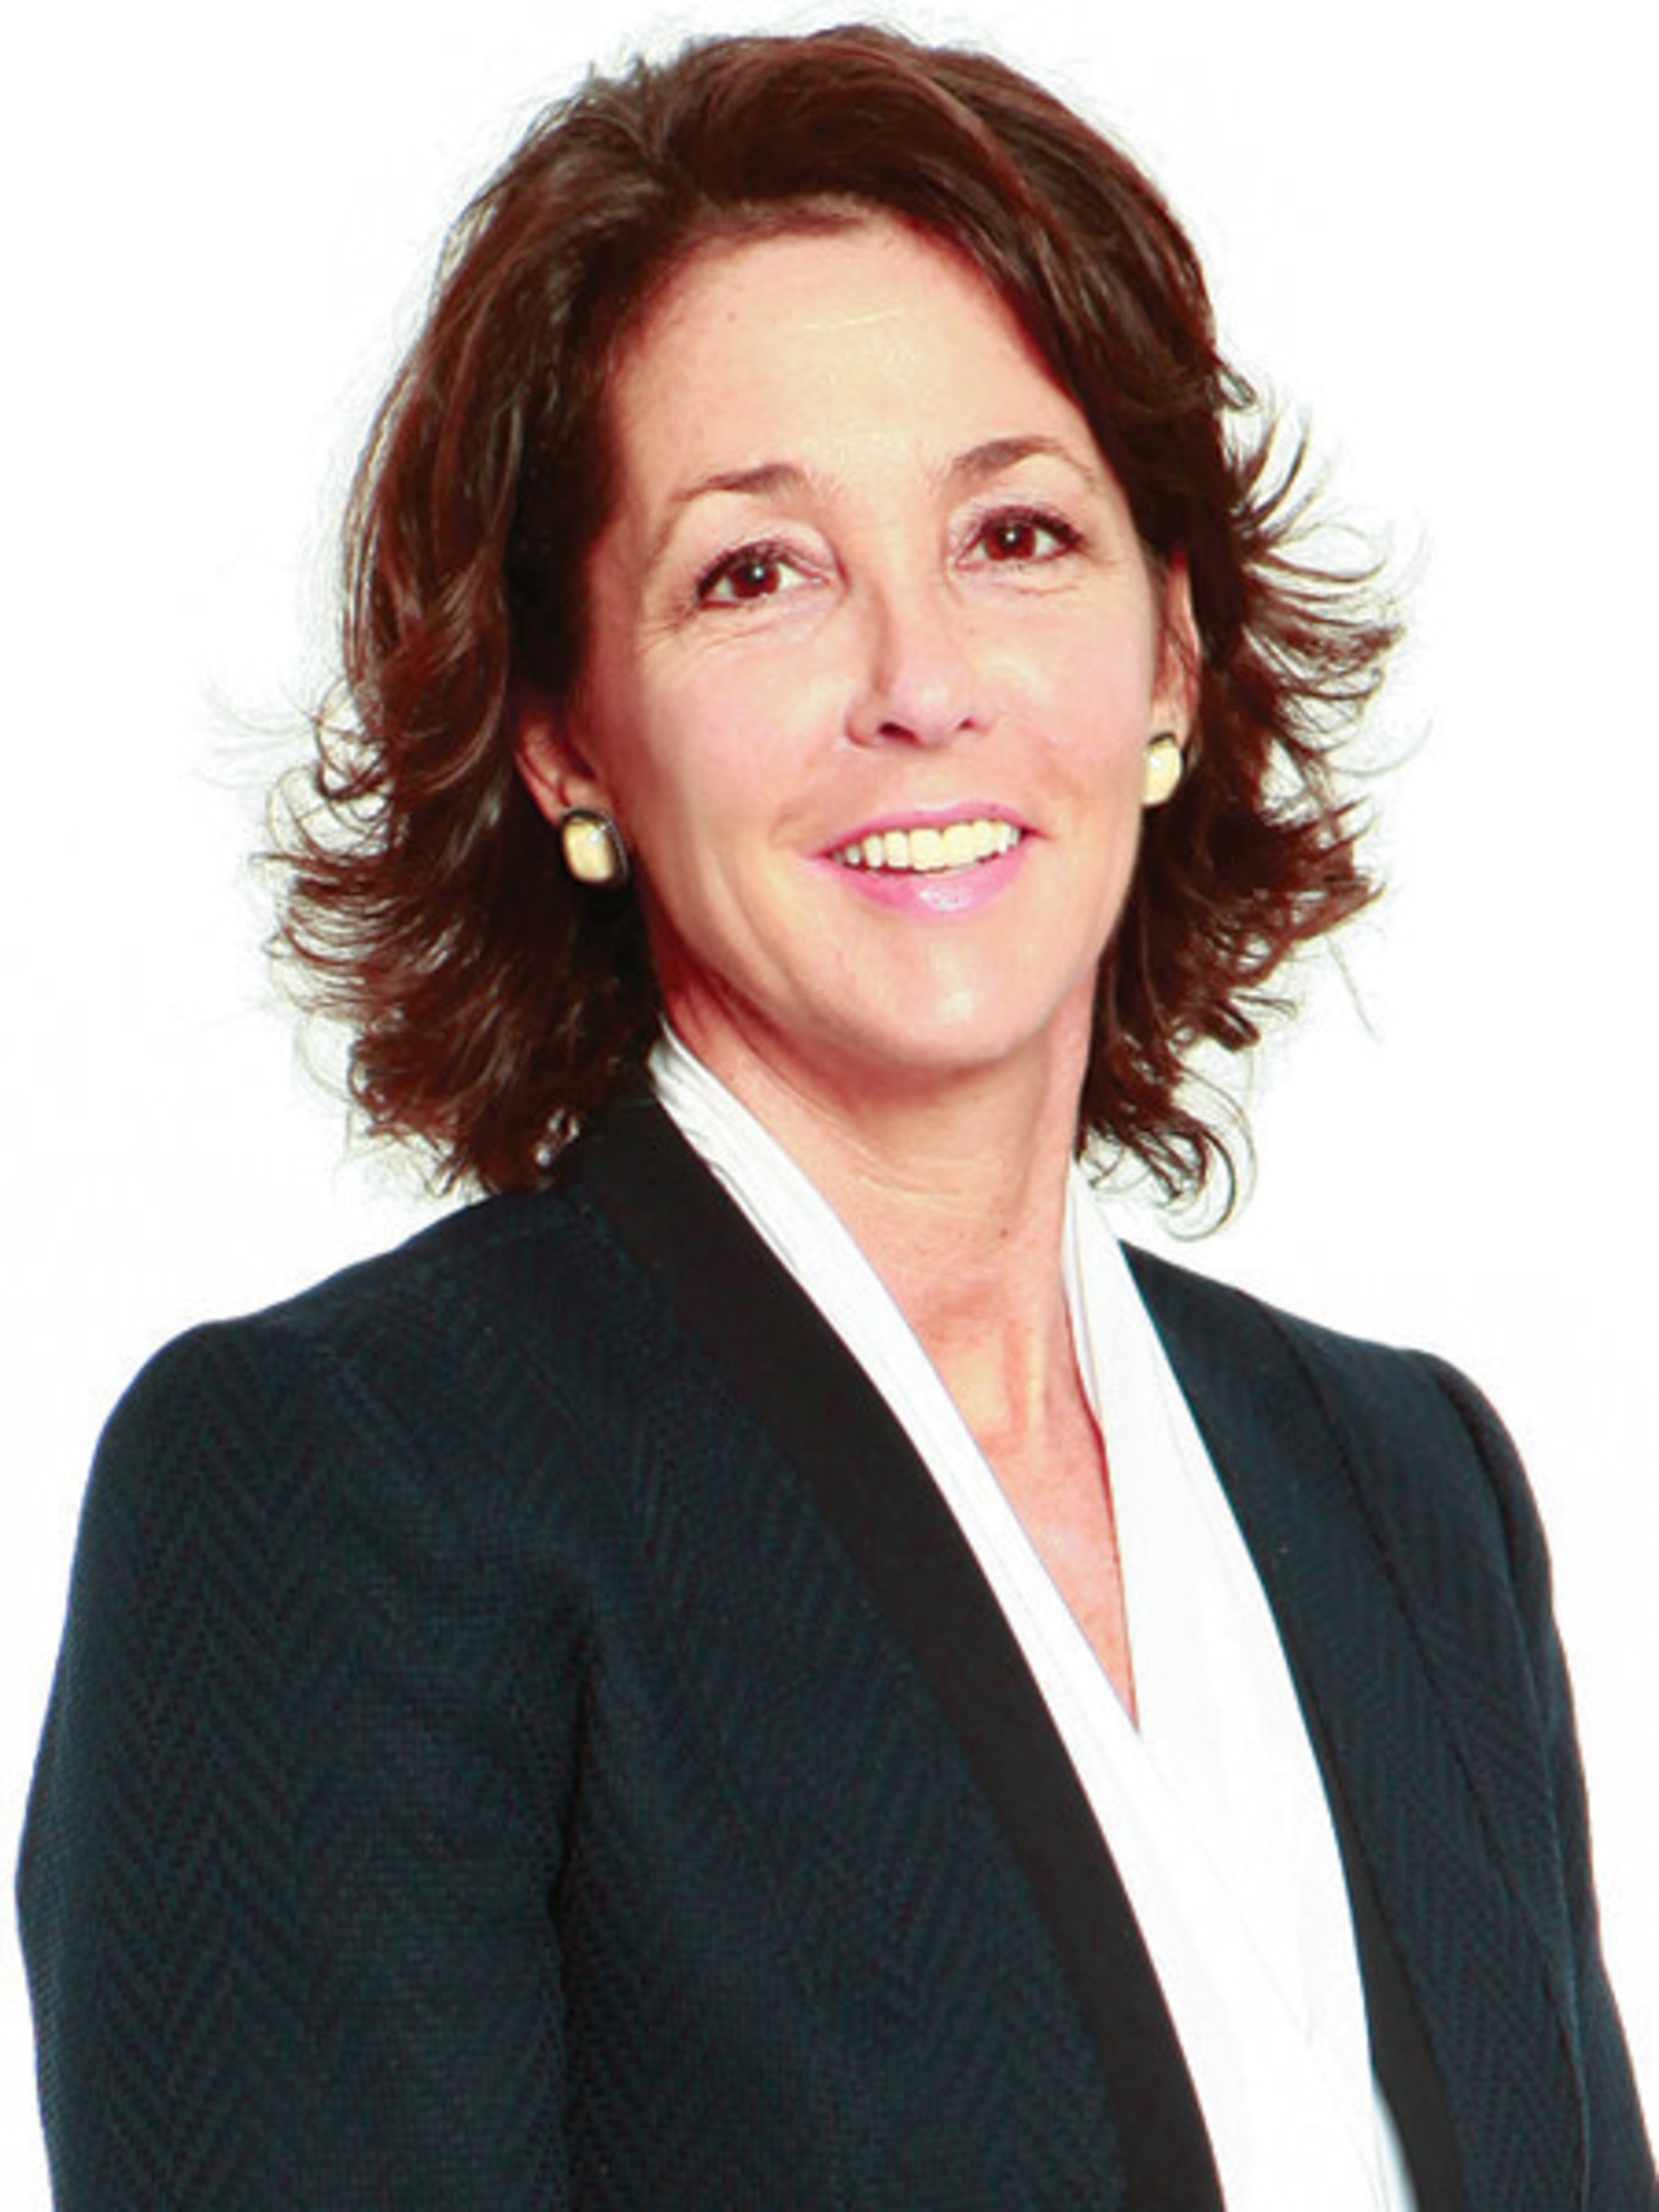 OppenheimerFunds announced that Sharon French joined the firm as Head of Beta Solutions.